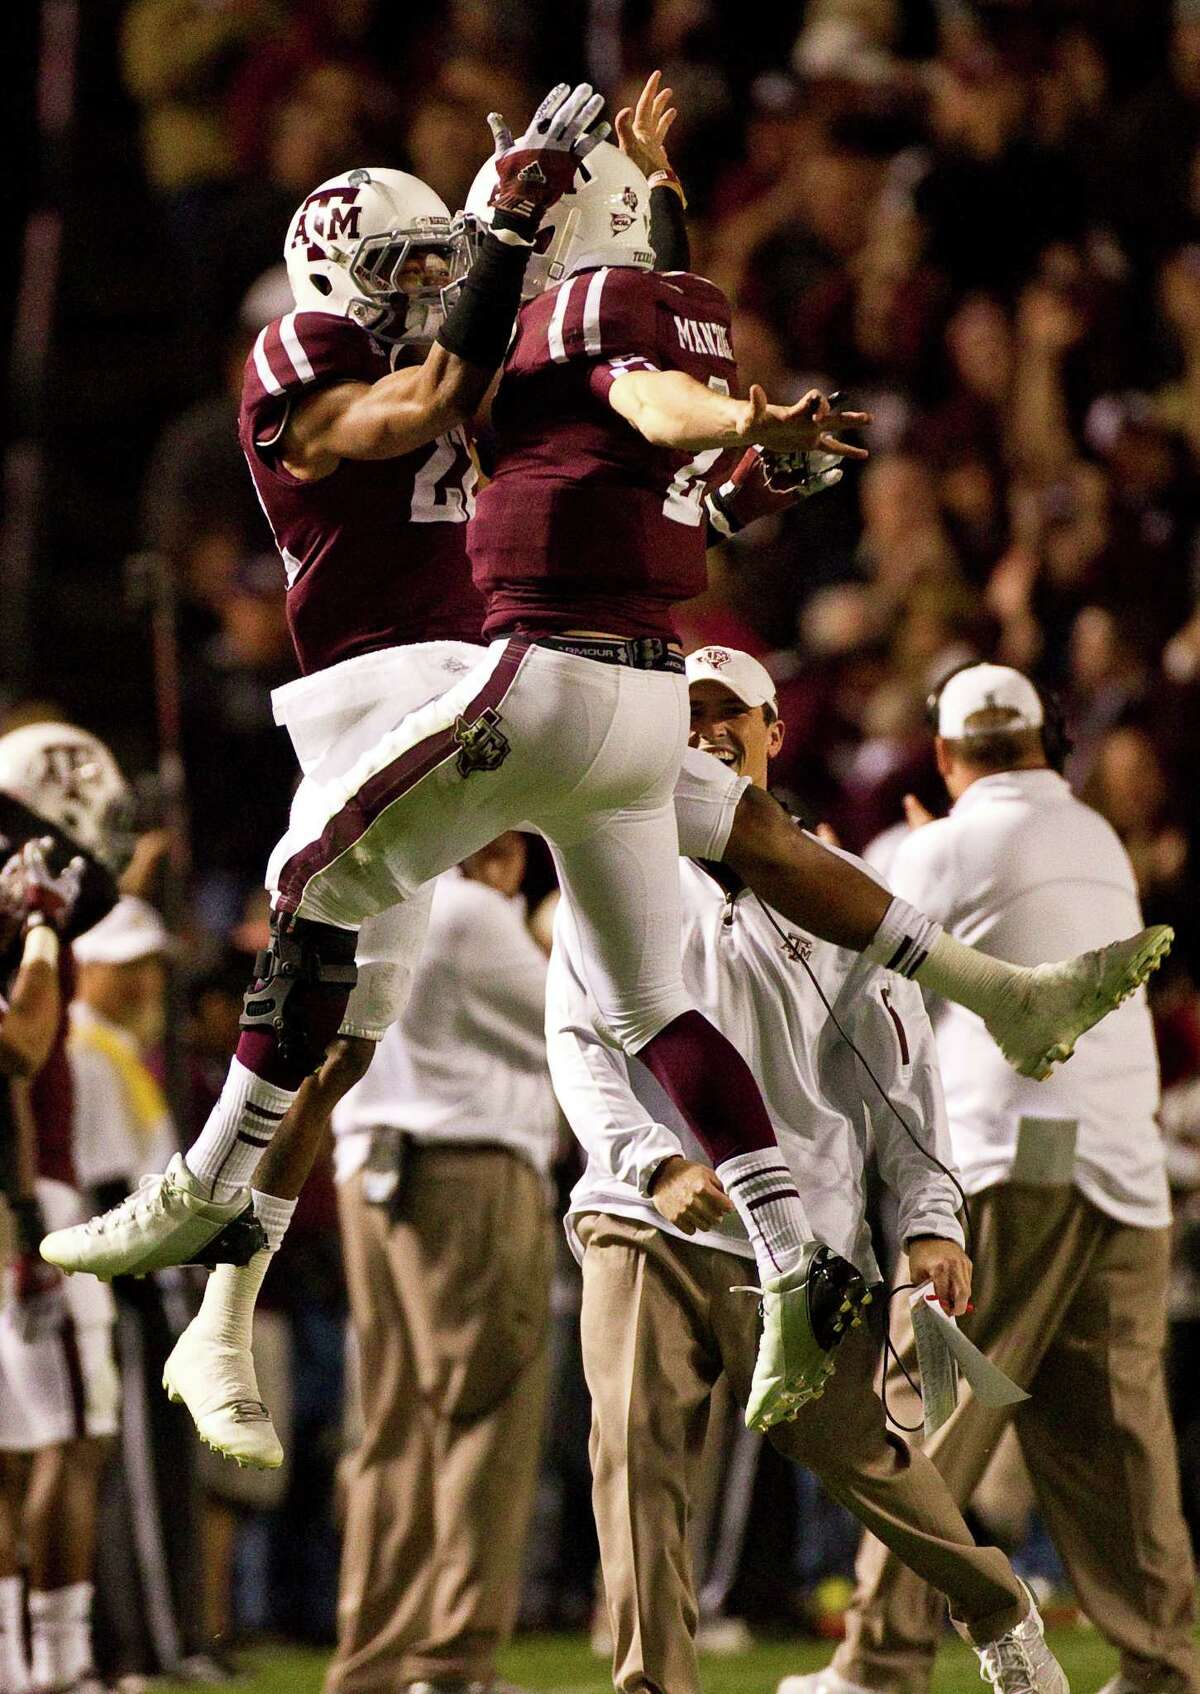 Texas A&M defensive back Dustin Harris (22) and Texas A&M quarterback Johnny Manziel (2) celebrate after Manziel threw a touchdown pass during the second quarter of a NCAA football game, Saturday, Nov. 24, 2012, in Kyle Field in College Station.